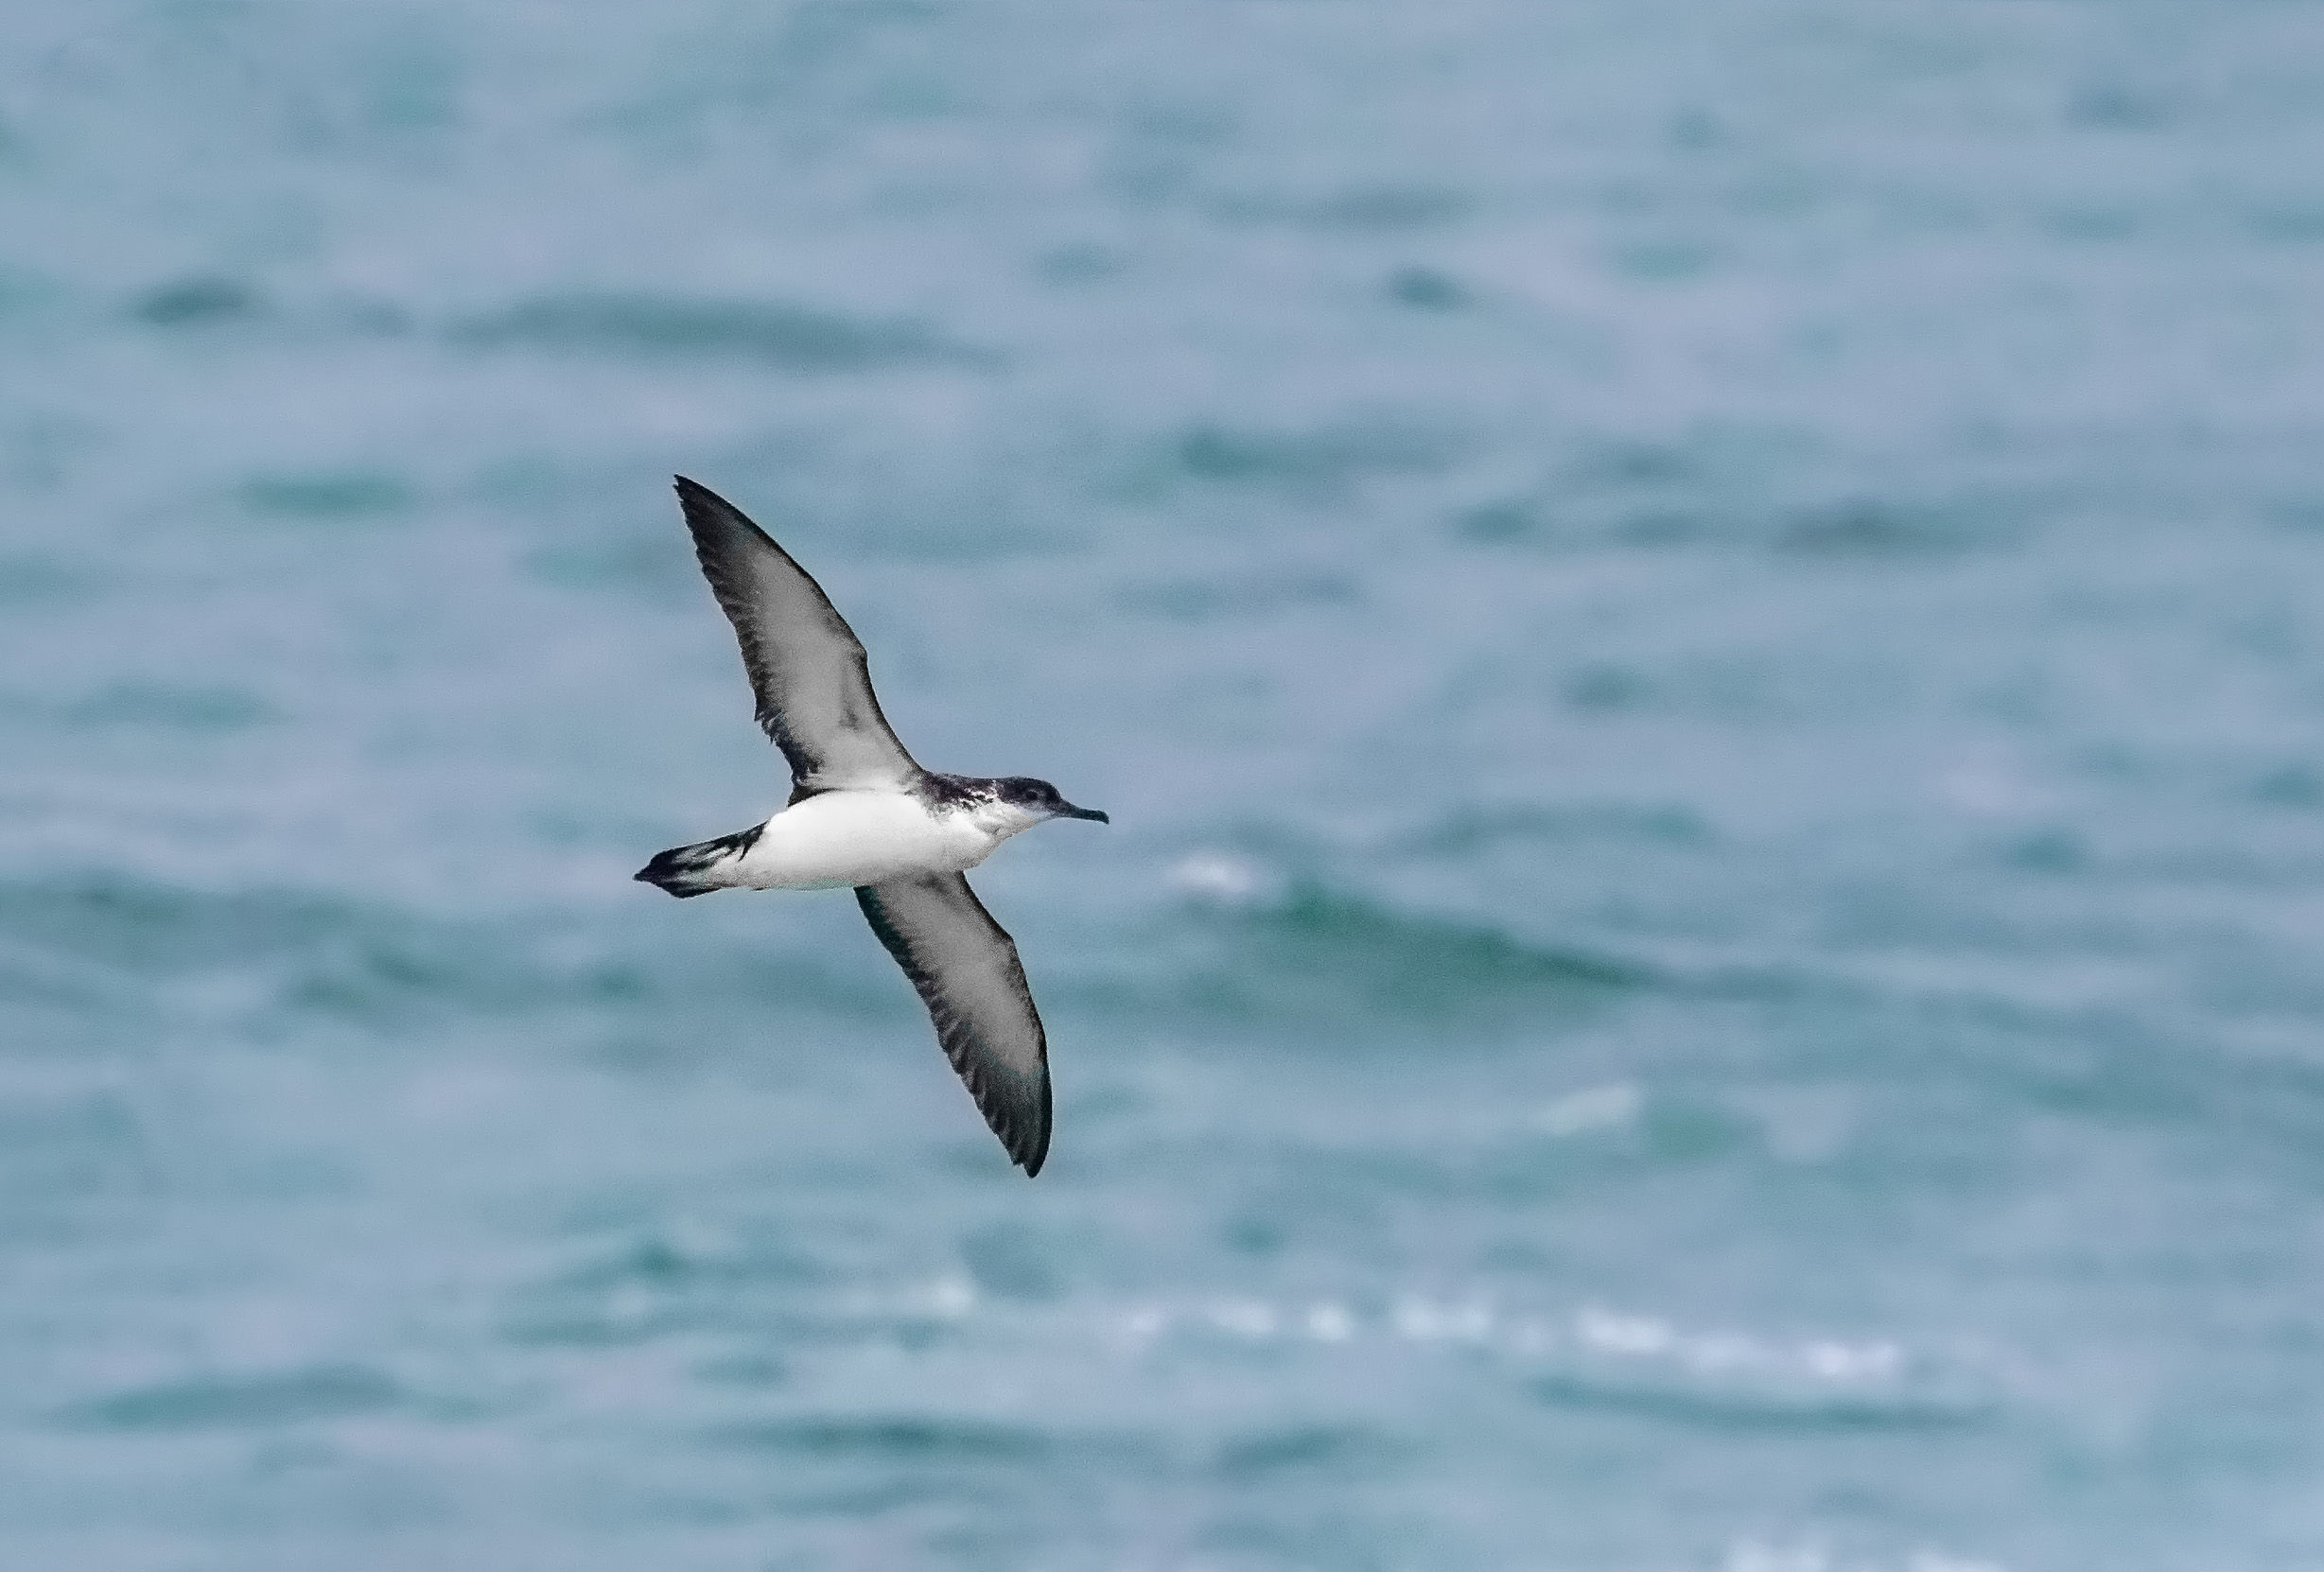 Max Shearwater mid-flight over the sea.